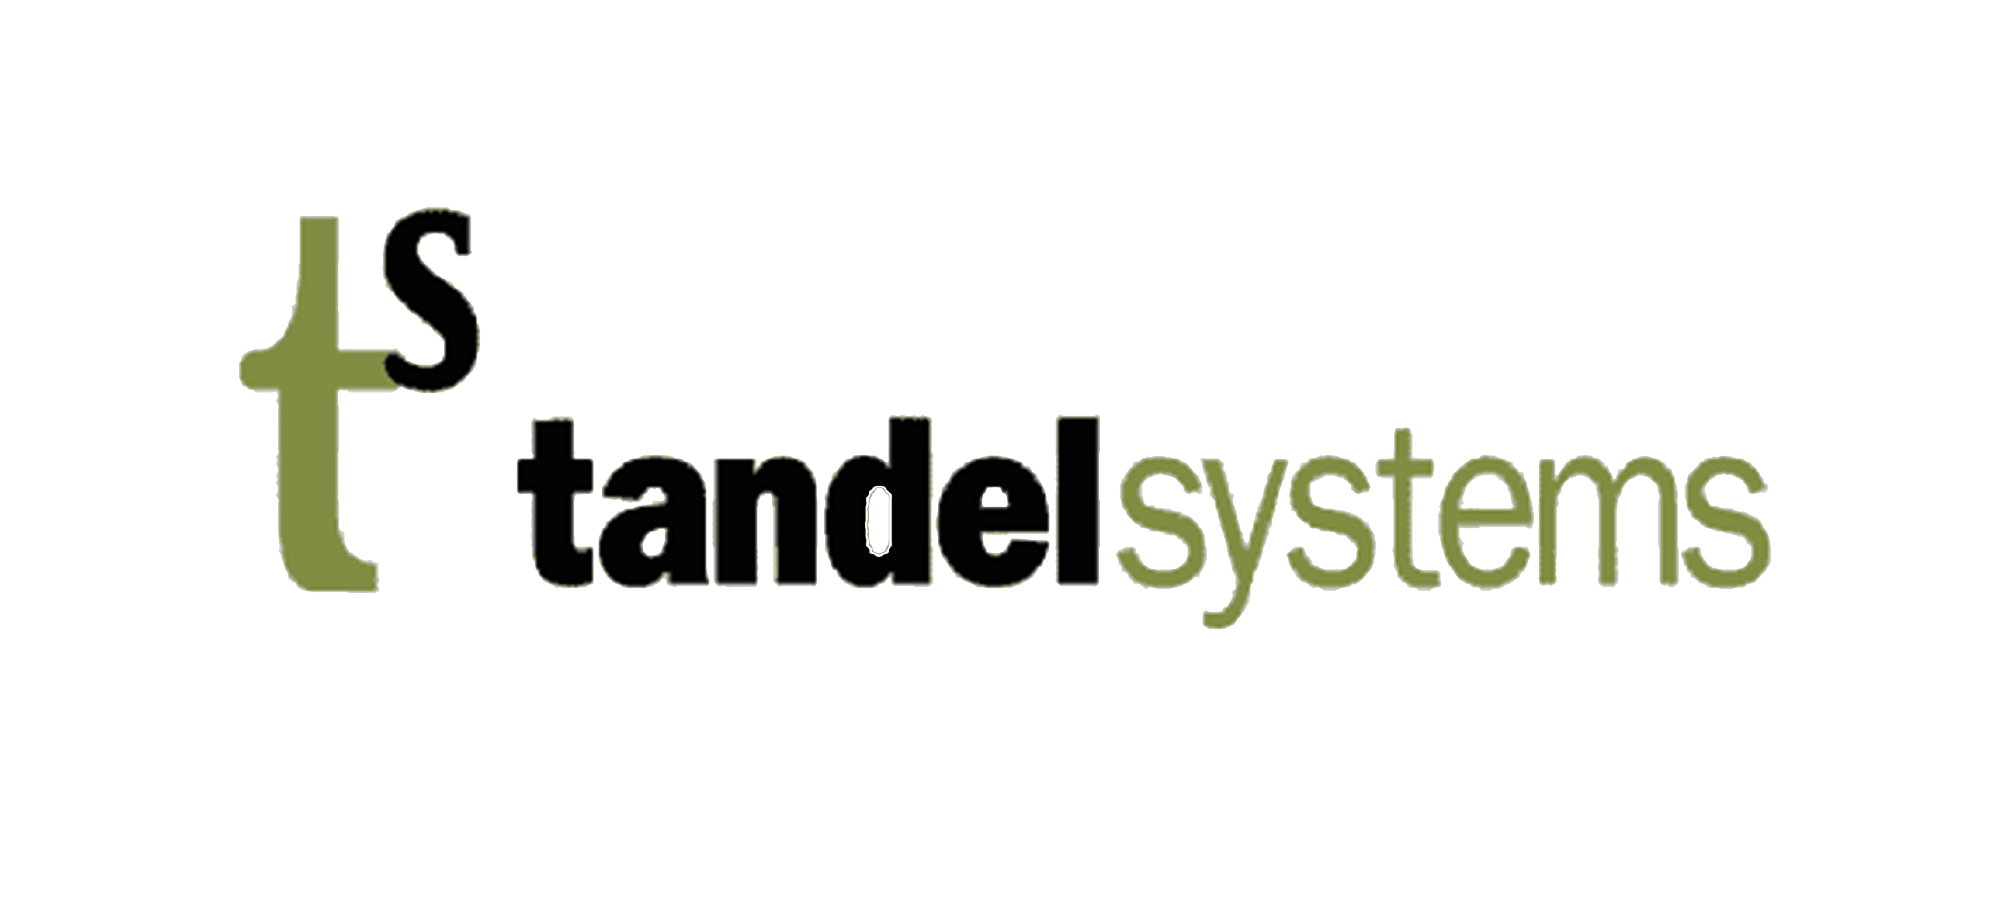 tandal systems